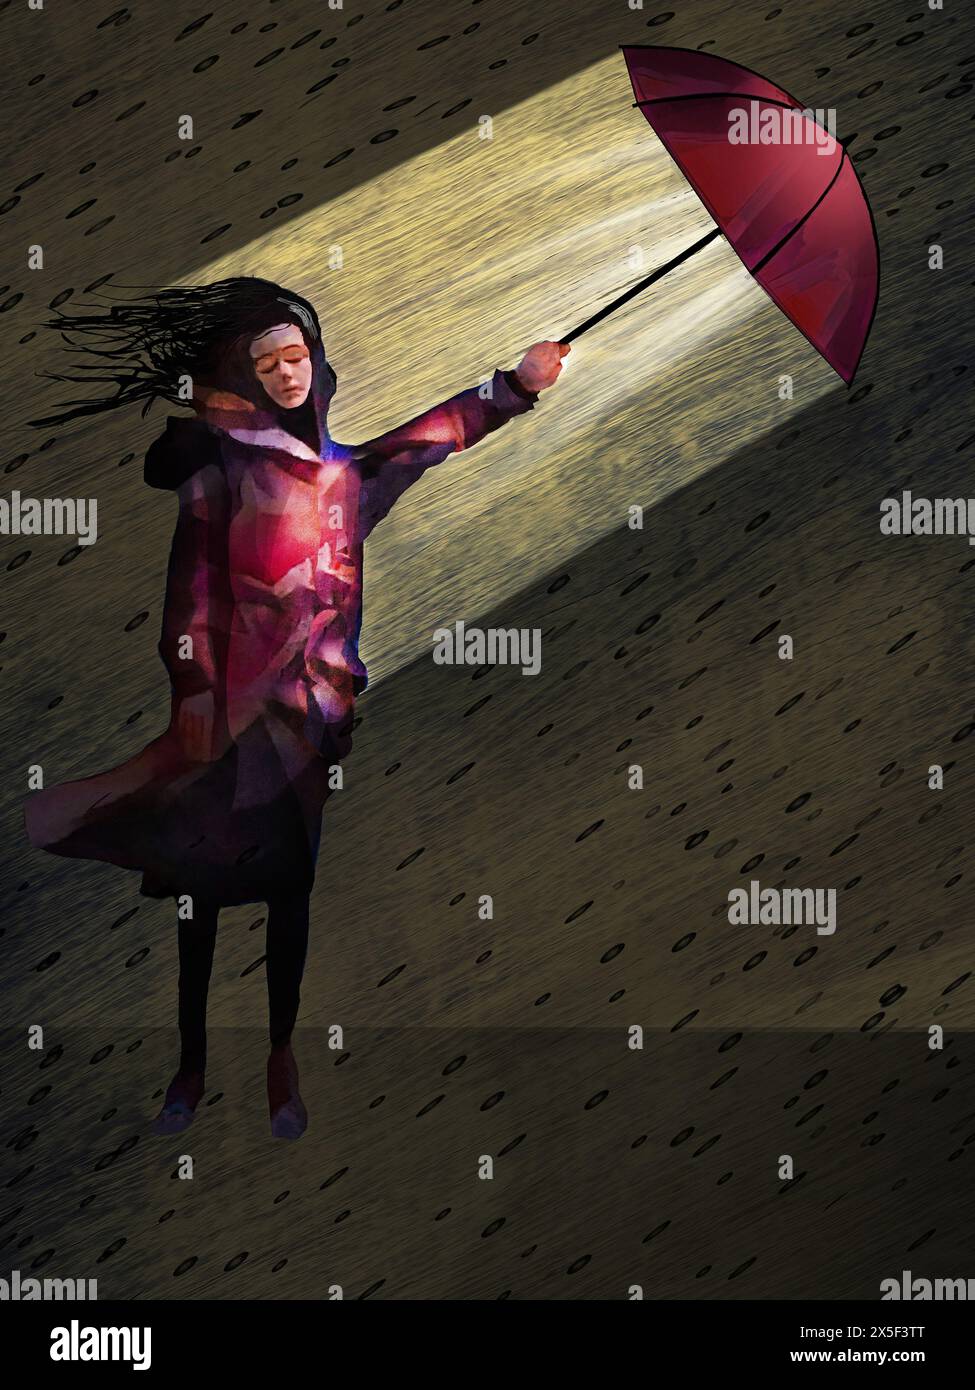 Defending herself from a storm is a young woman with her umbrella in a 3-d illustration about protecting yourself. It can be a metaphor for many situa Stock Photo